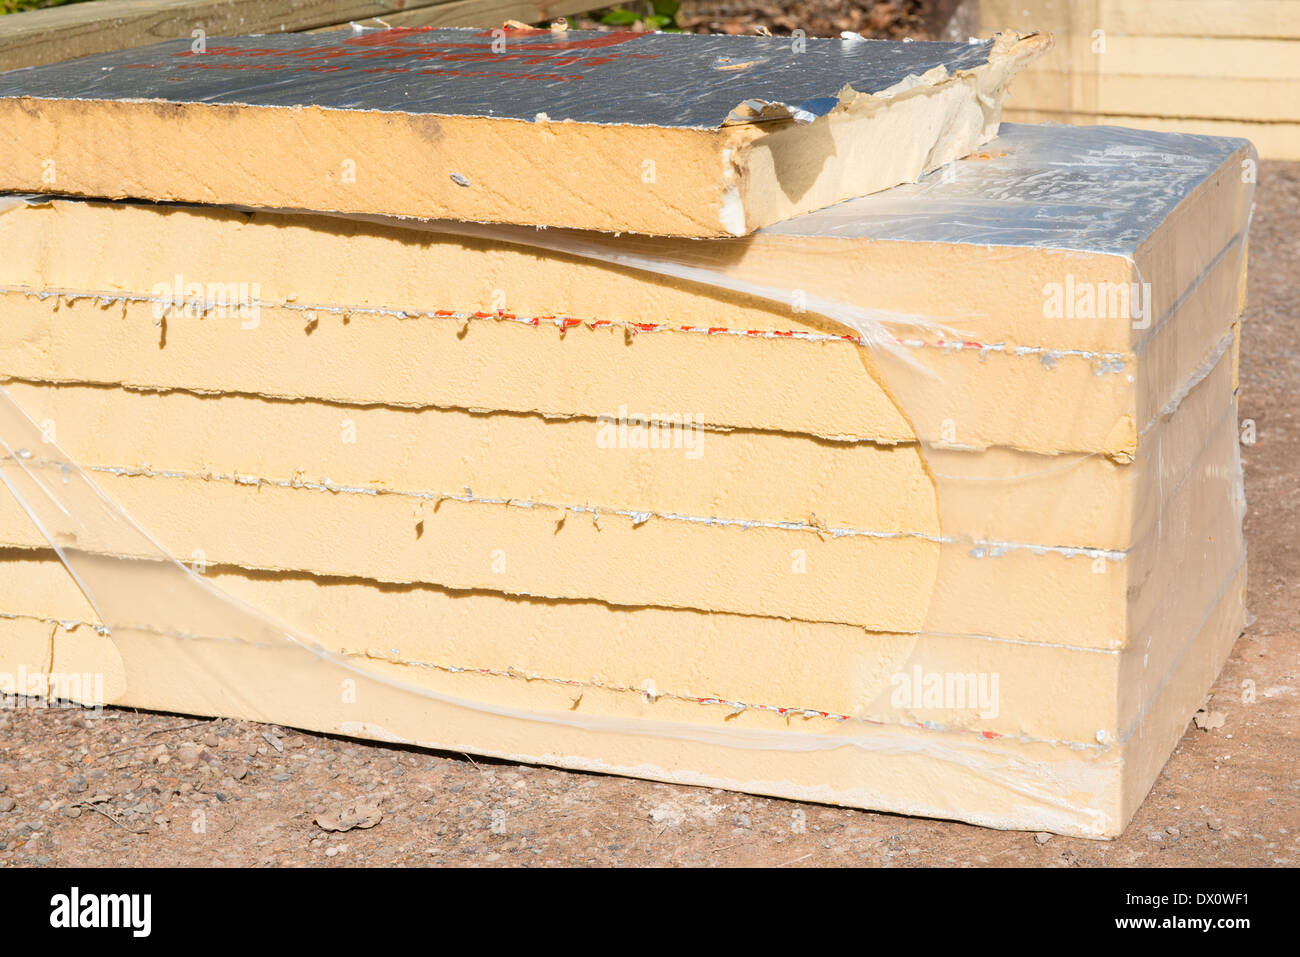 A pile of insulation boards on a construction site Stock Photo